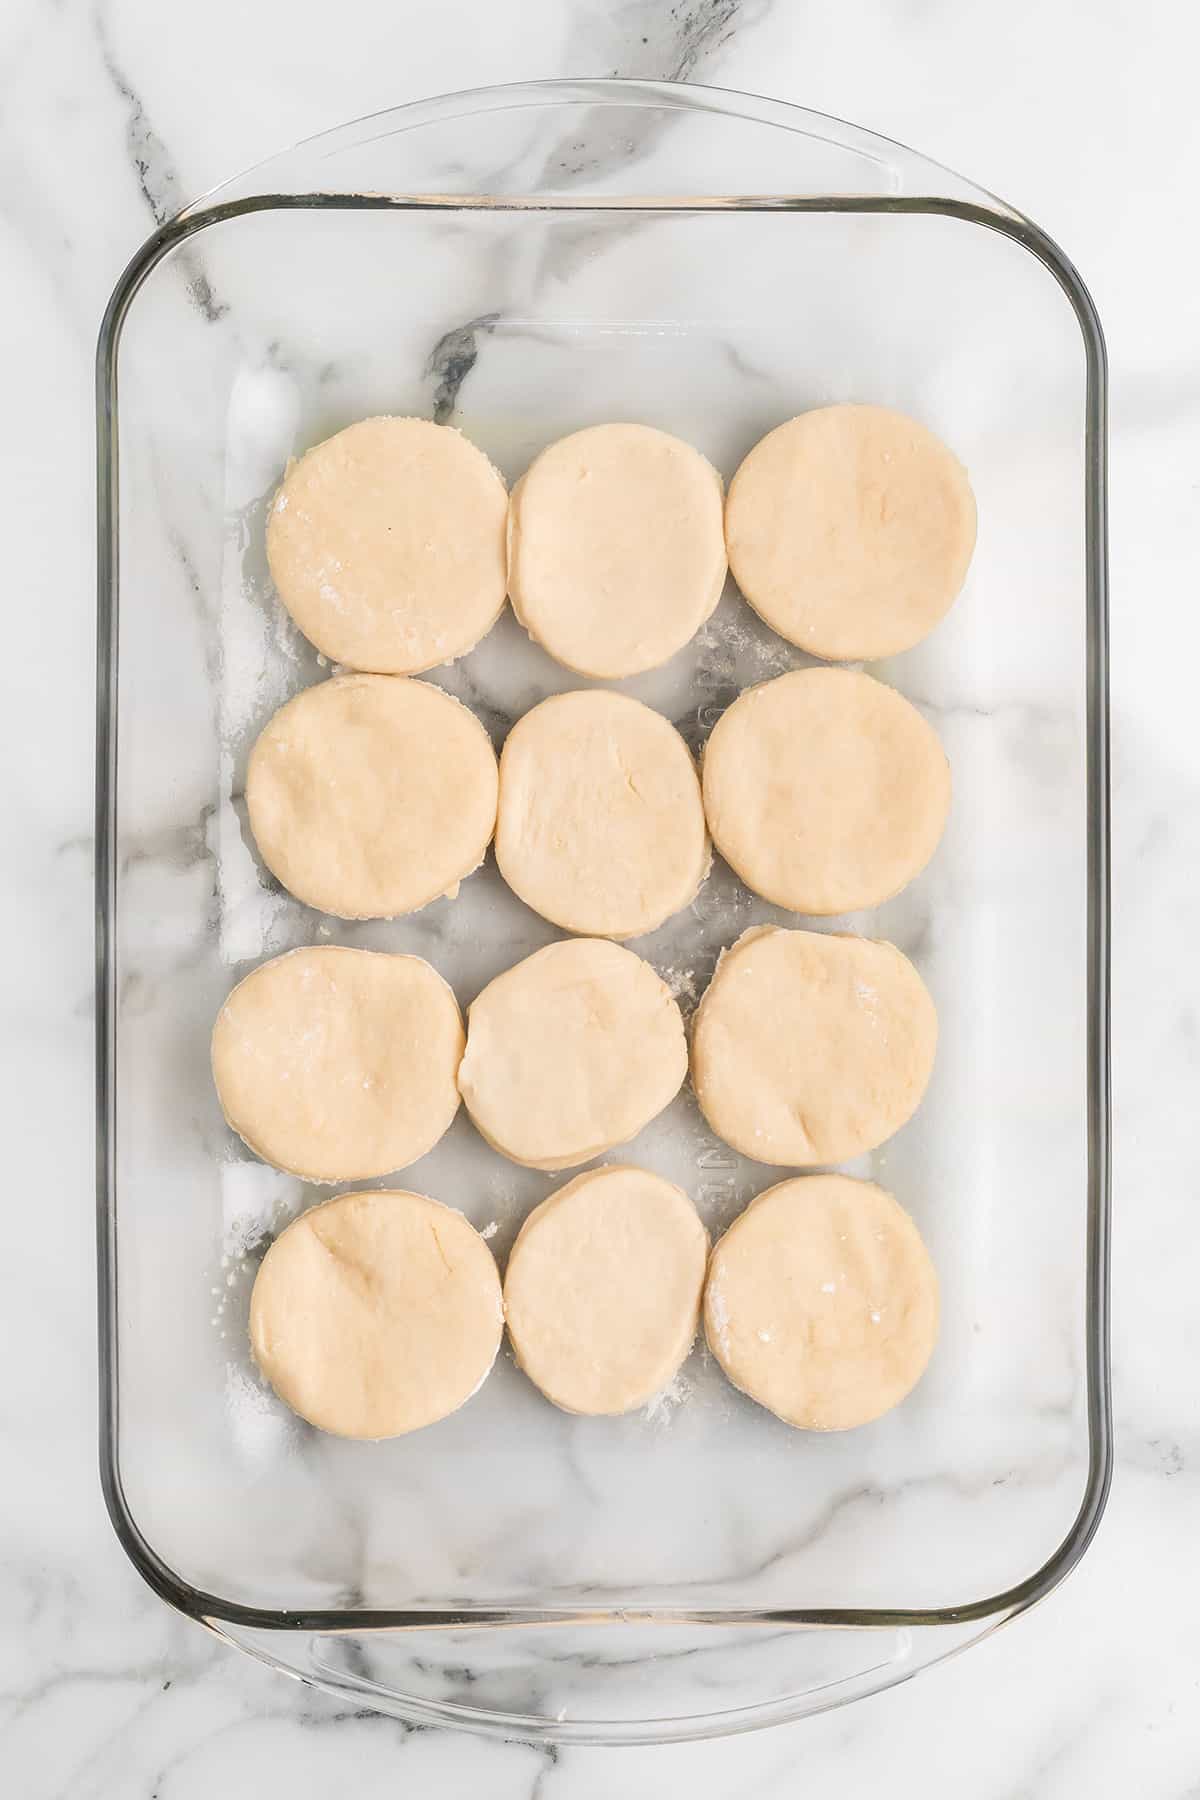 Biscuits in a glass baking dish.